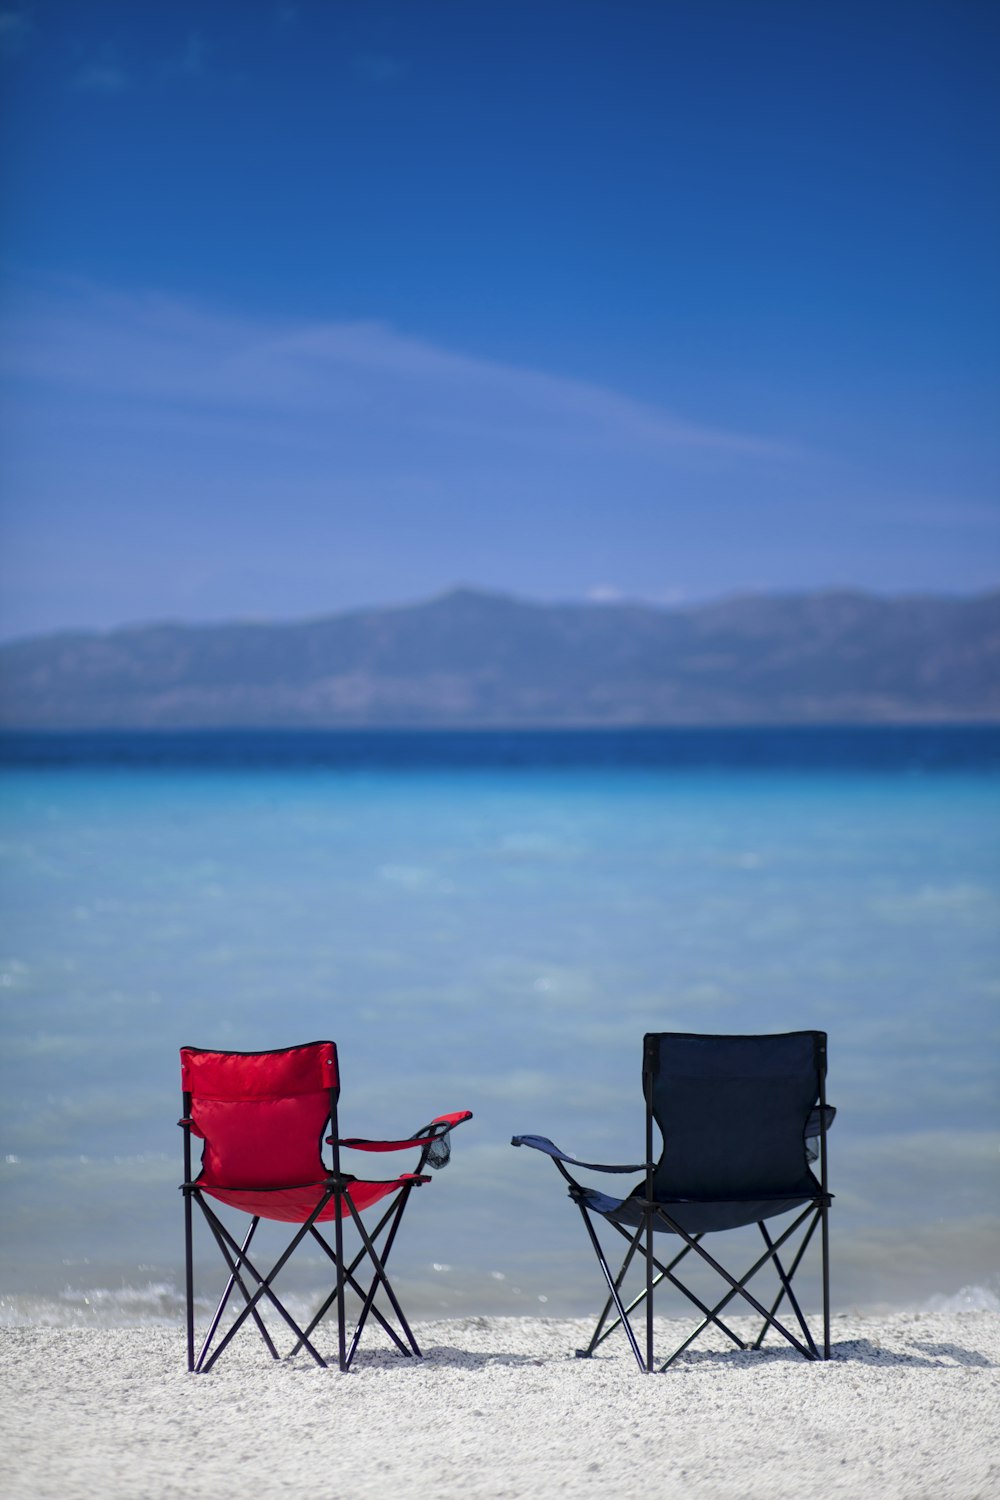 red and black camping chair on gray sand near body of water during daytime